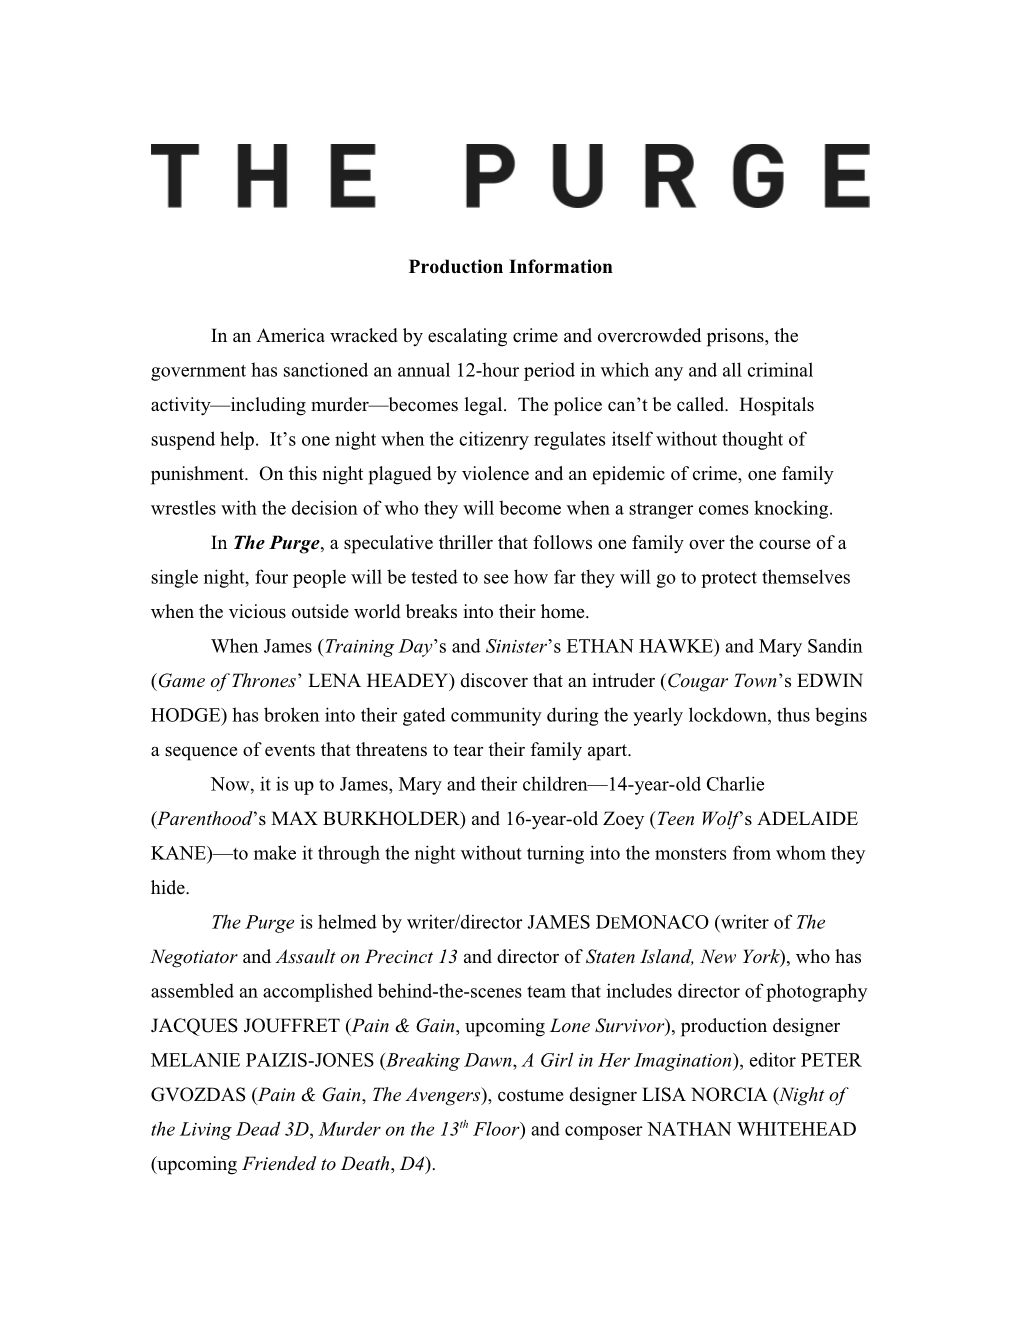 The Purge Production Information 2